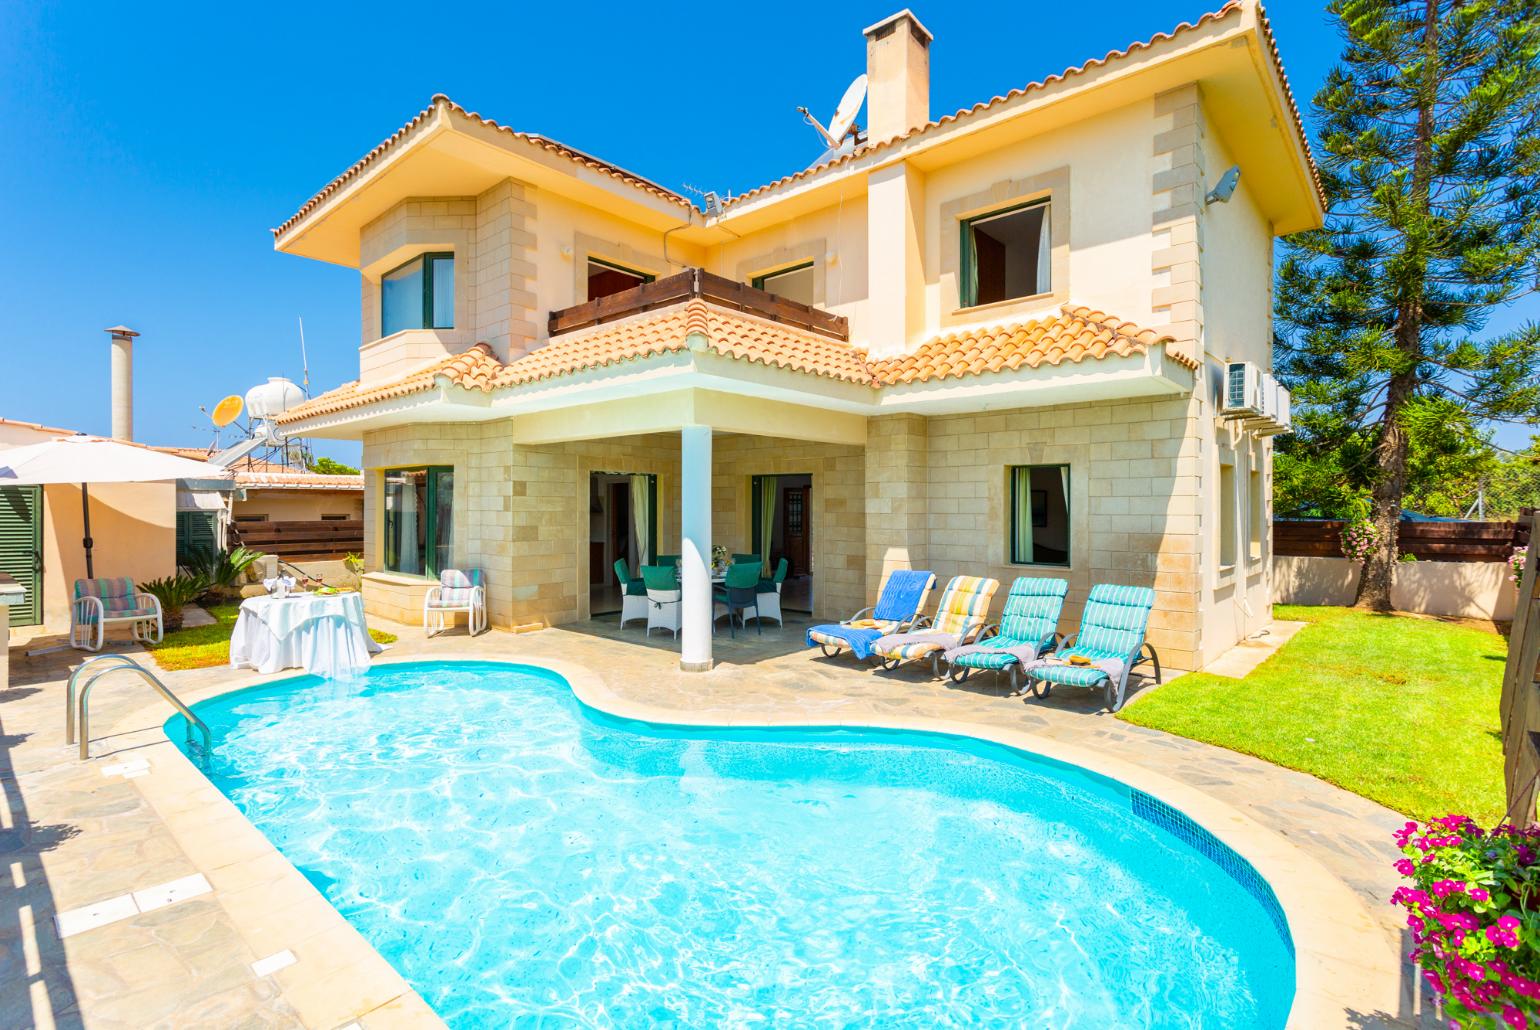 ,Beautiful villa with private pool, terrace, and large garden